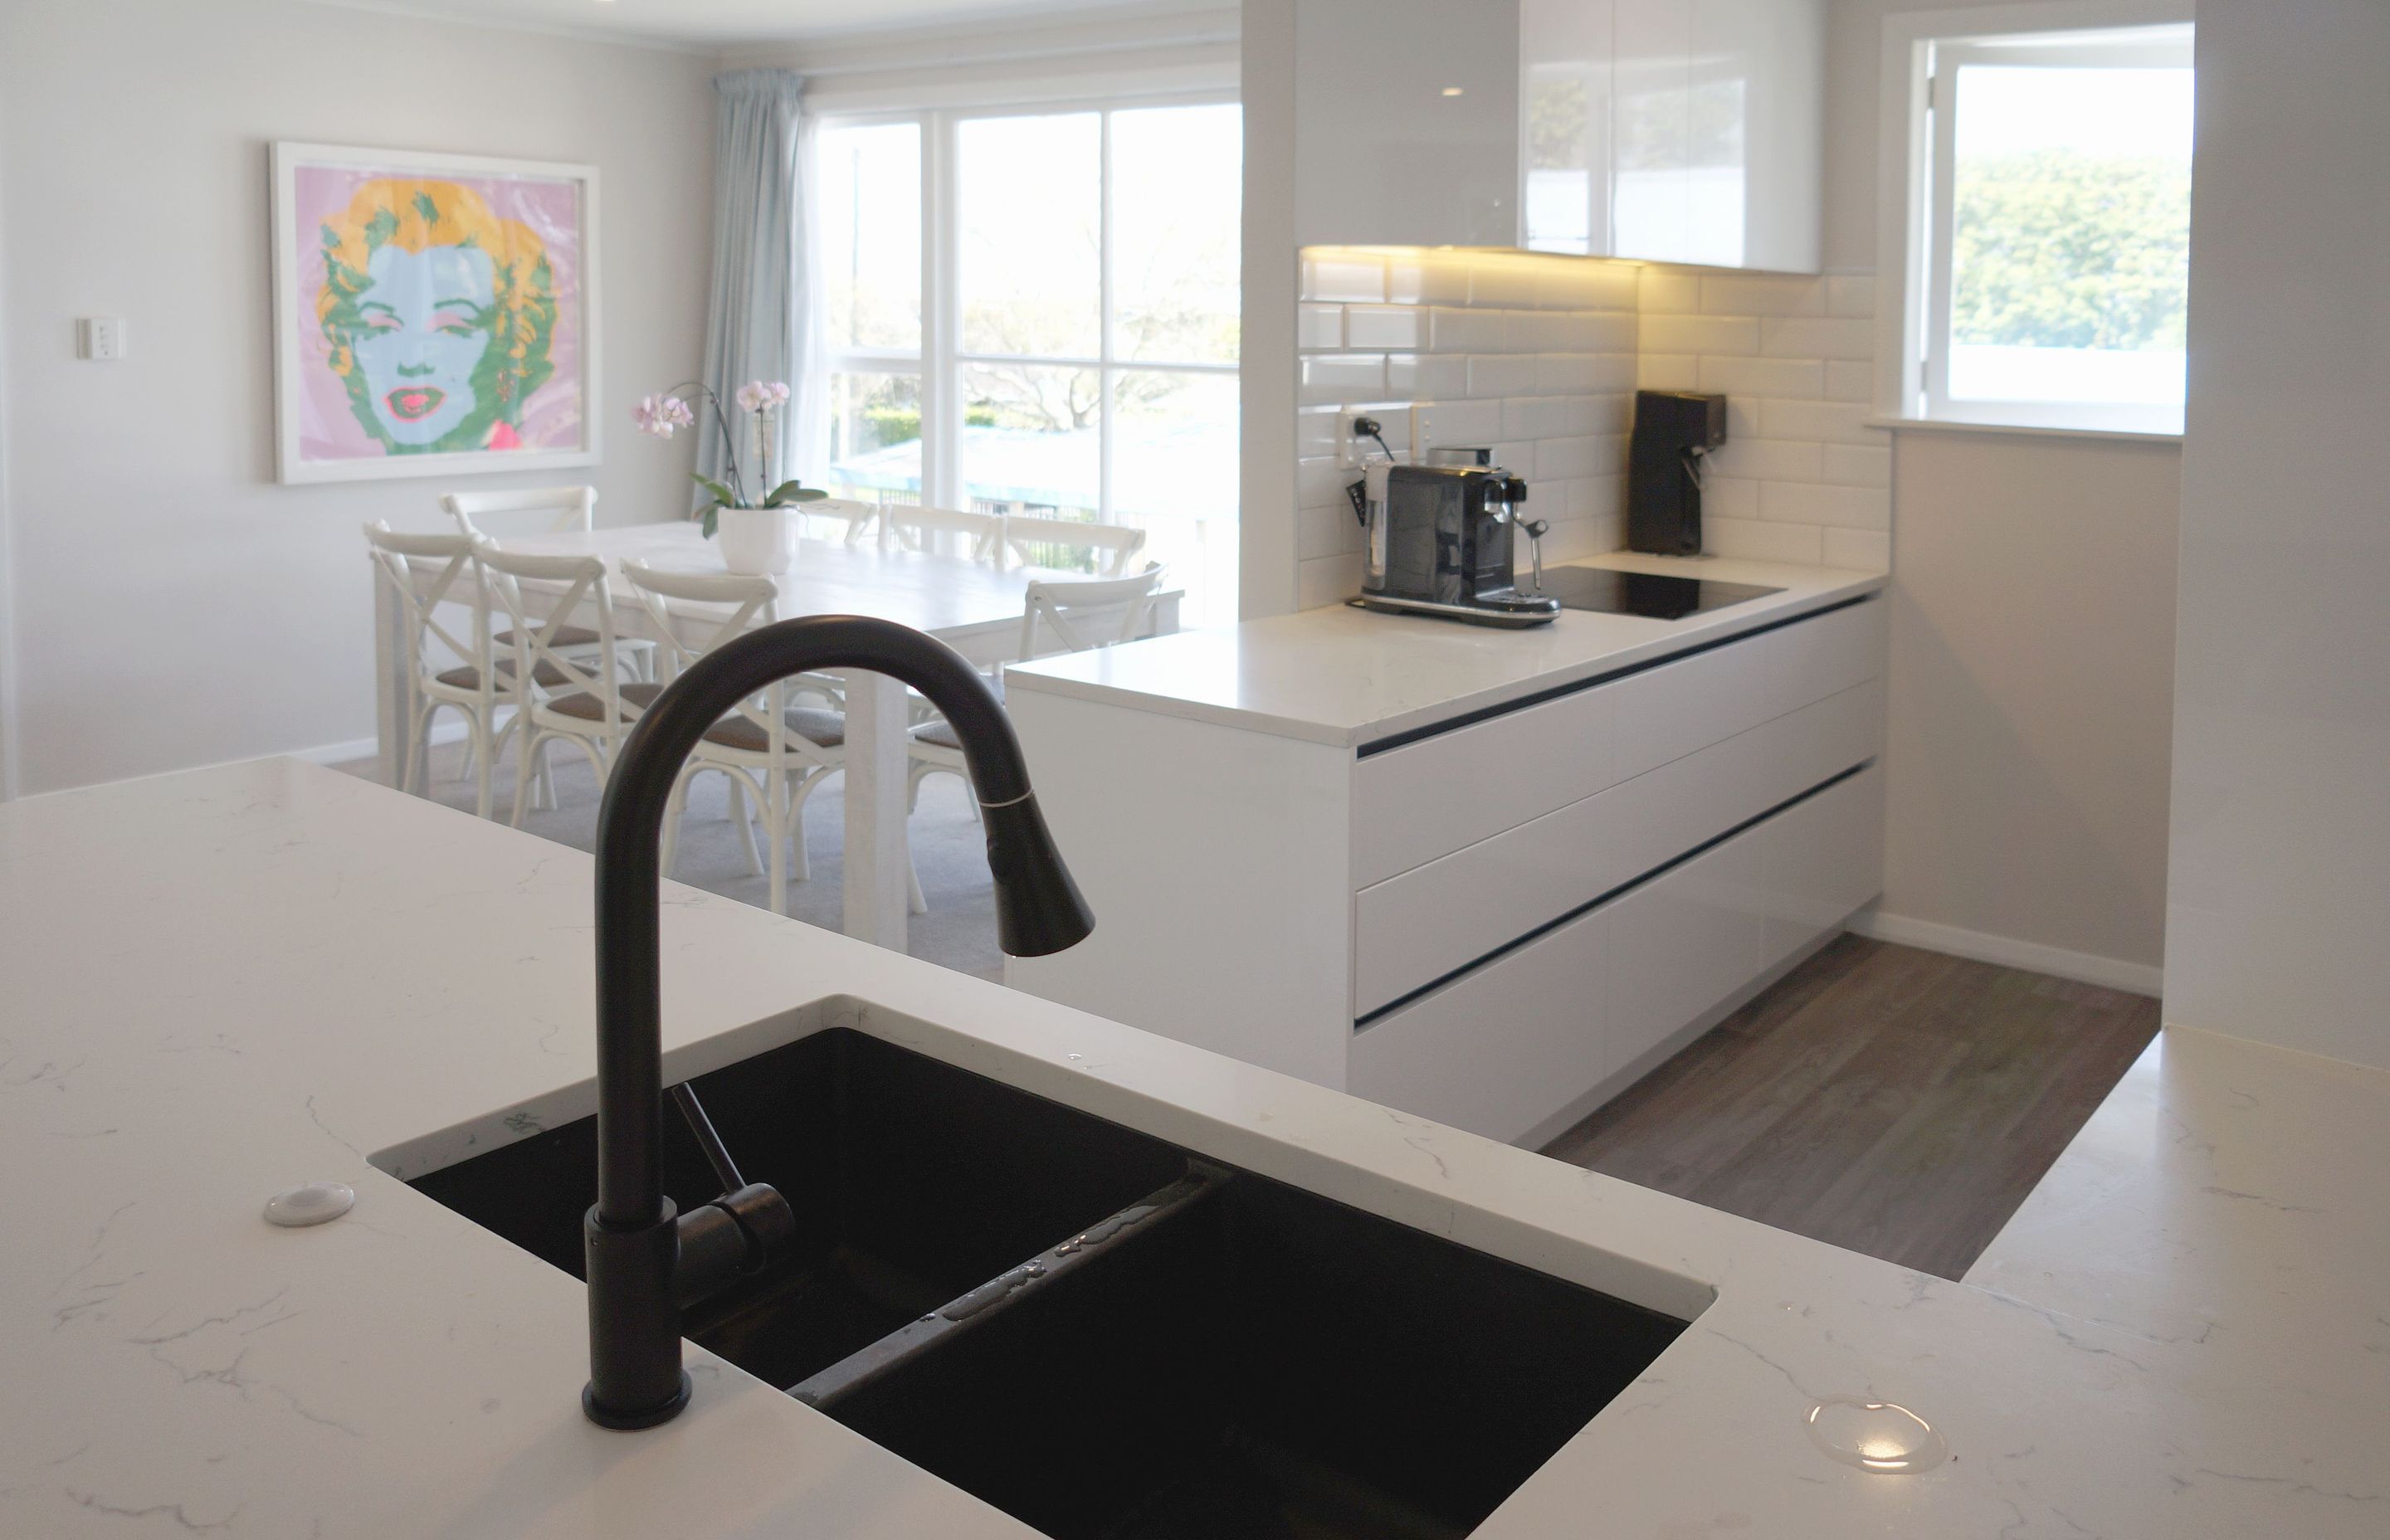 Full home renovation in Greenlane, Auckland
